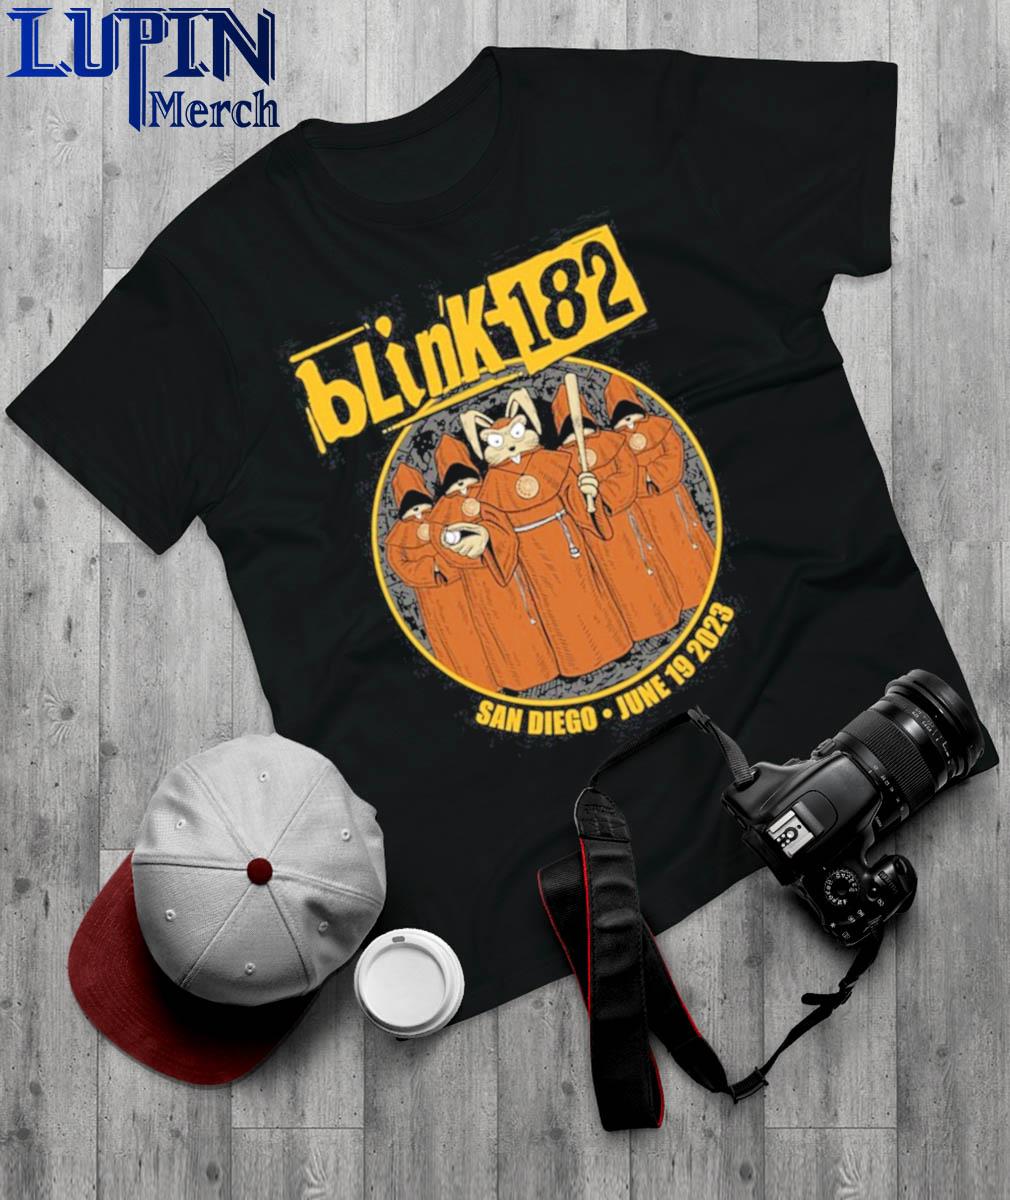 Official blink-182 San Diego, CA Tour T-Shirt, hoodie, sweater